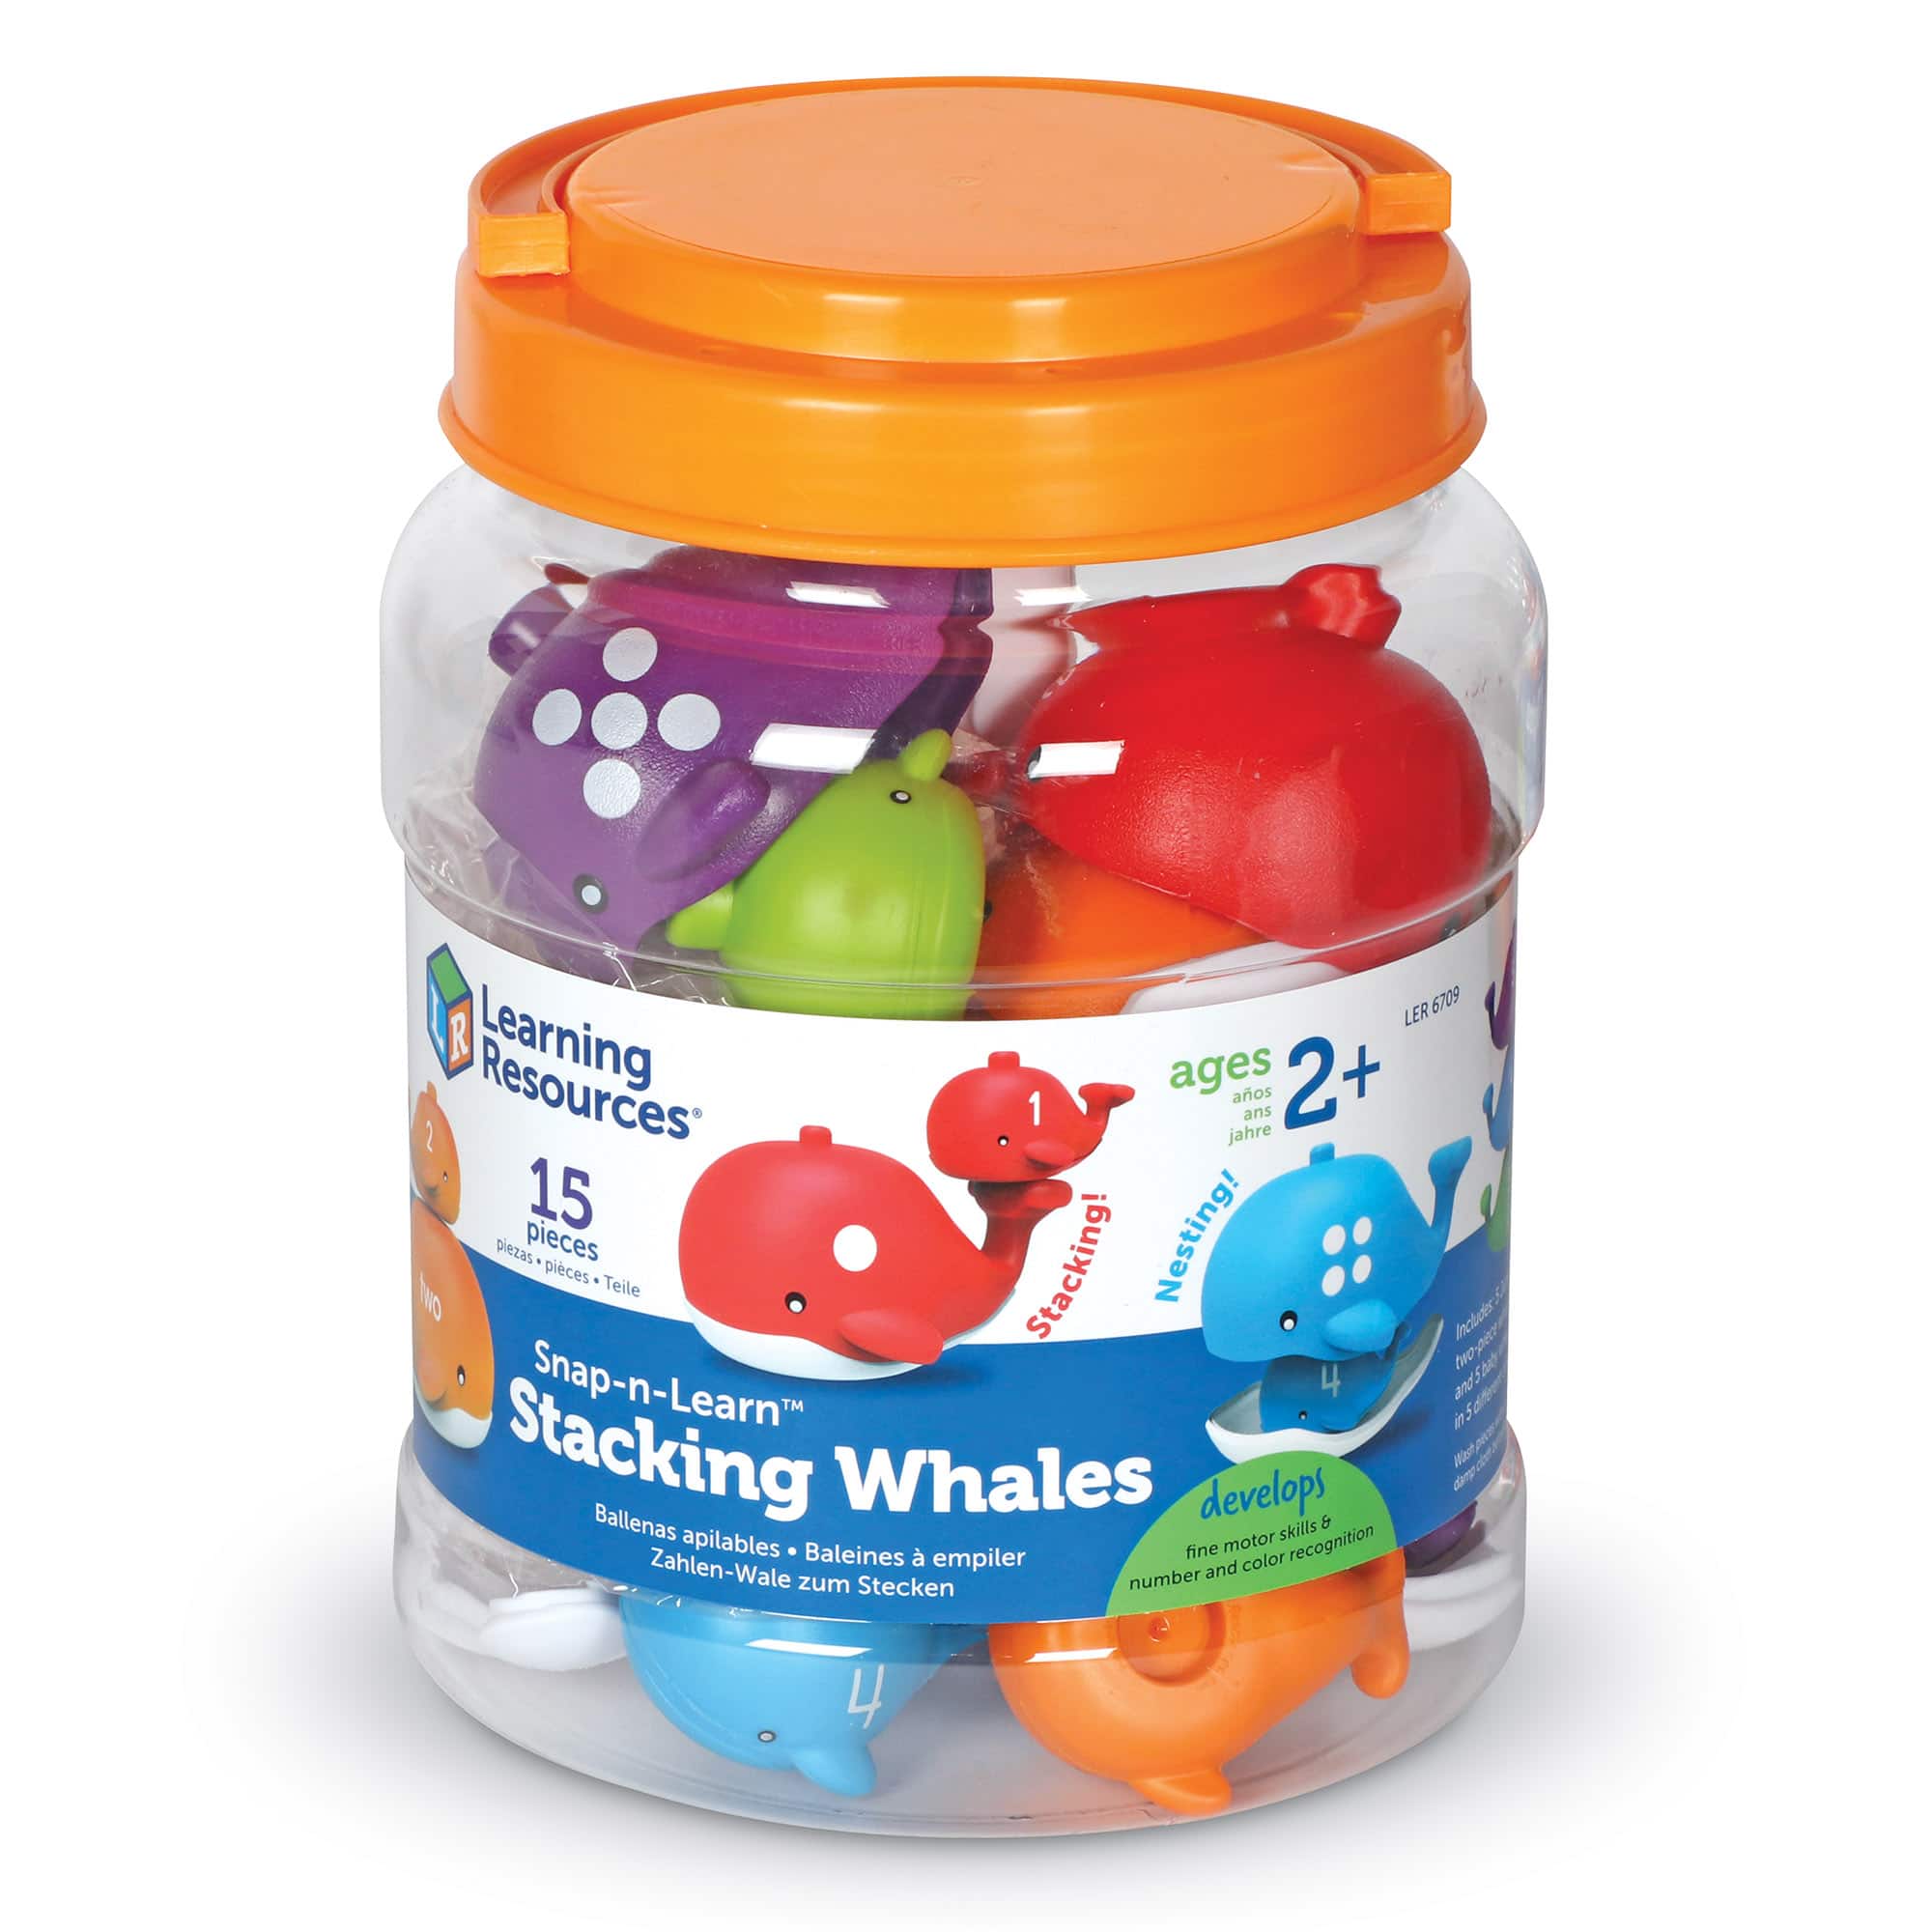 Learning Resources Snap-n-Learn Stacking Whales